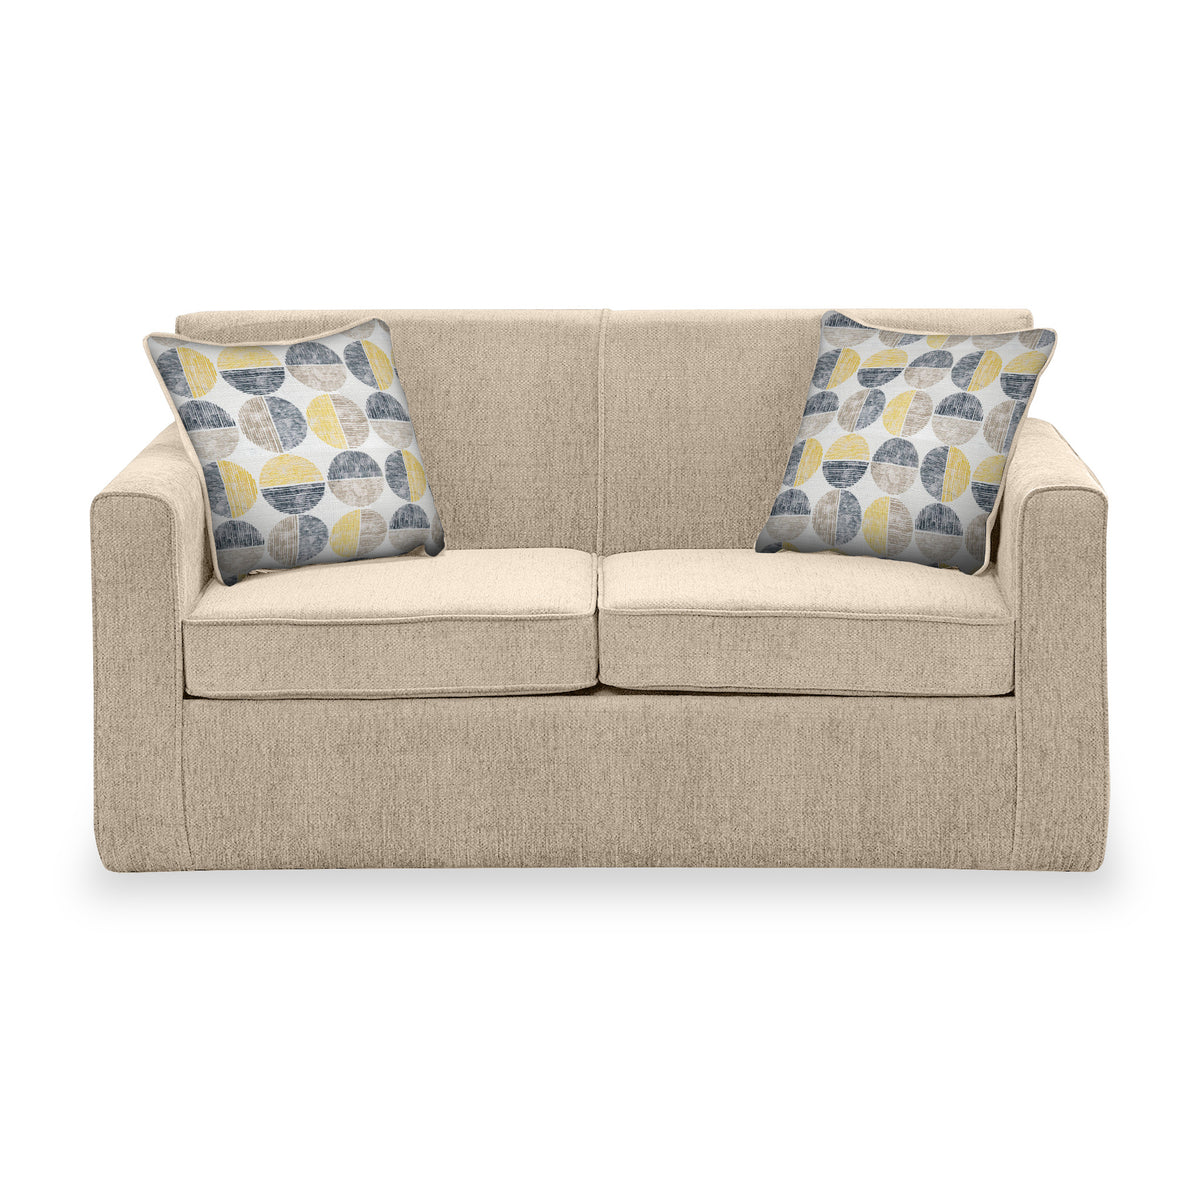 Bawtry Oatmeal Faux Linen 2 Seater Sofabed with Beige Scatter Cushions from Roseland Furniture